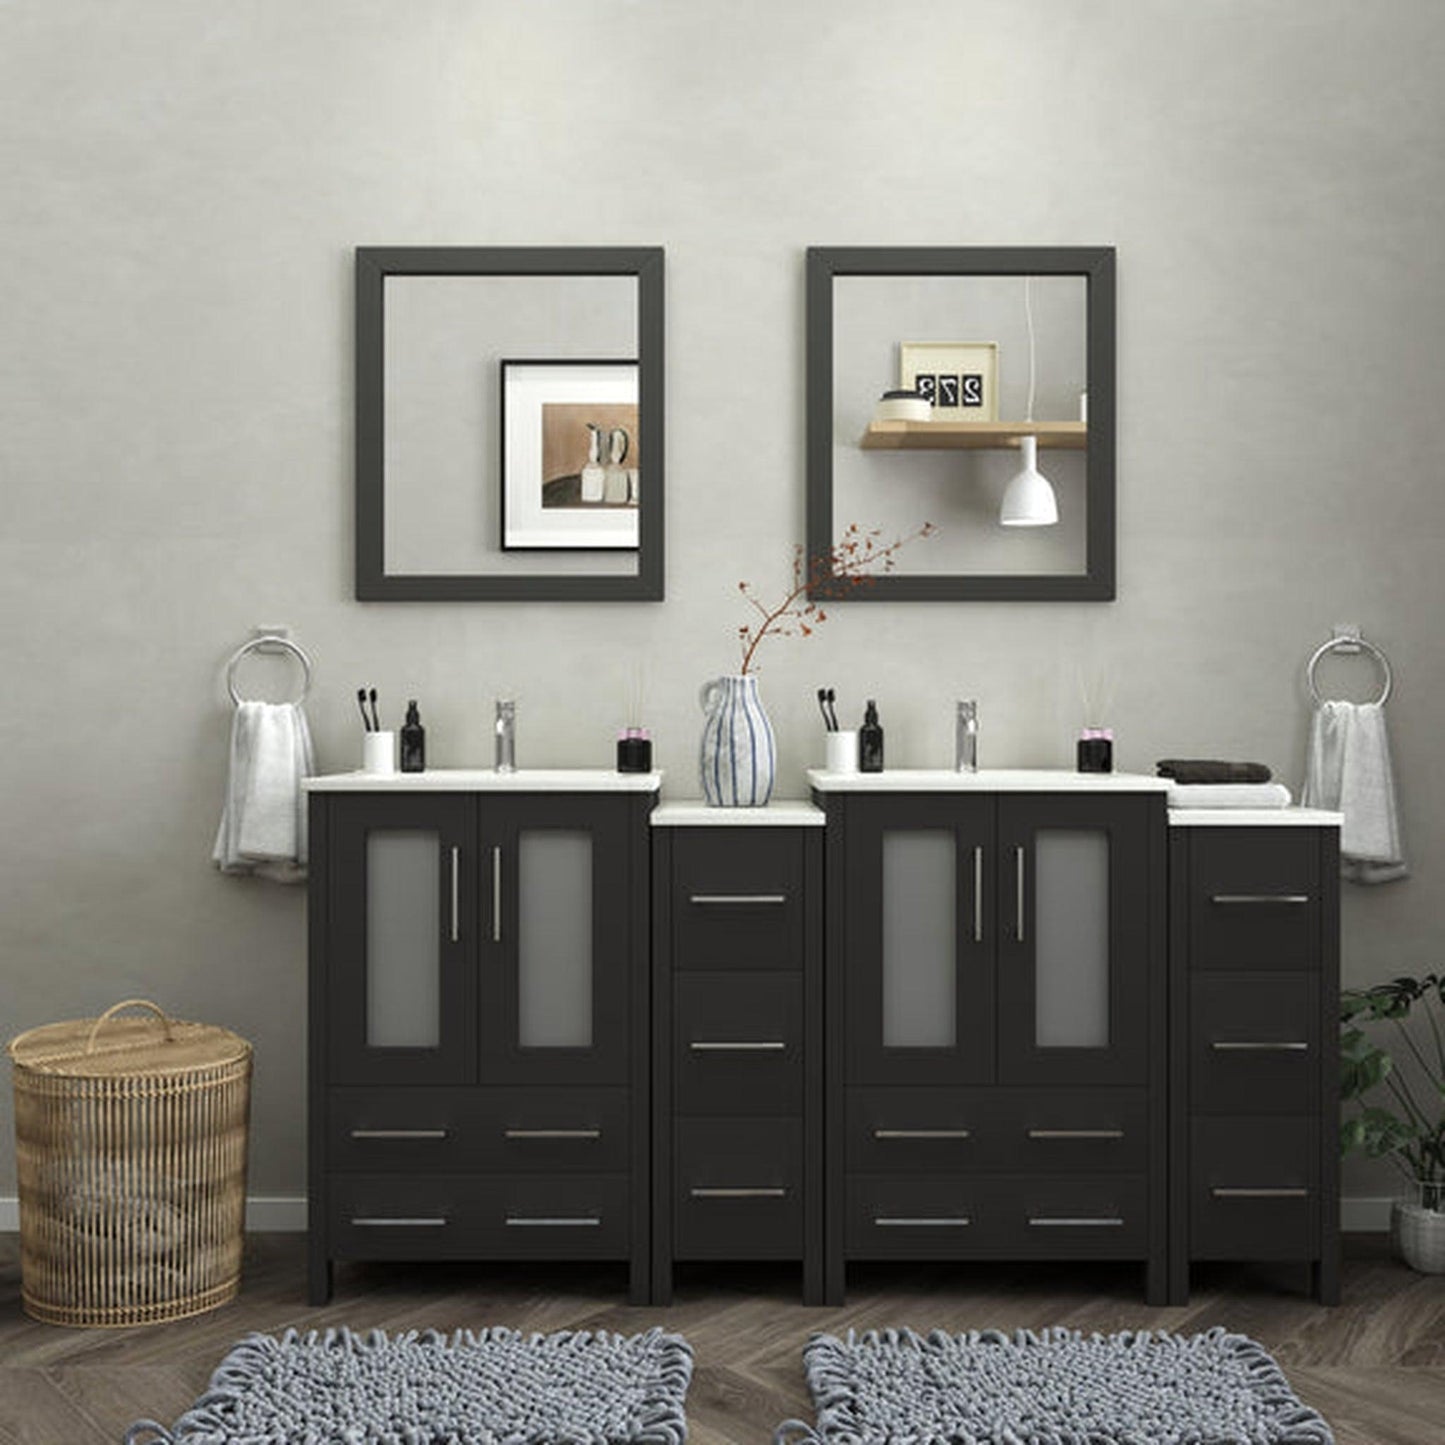 Vanity Art Brescia 72" Double Espresso Freestanding Vanity Set With Integrated Ceramic Sink, 2 Side Cabinets and 2 Mirrors